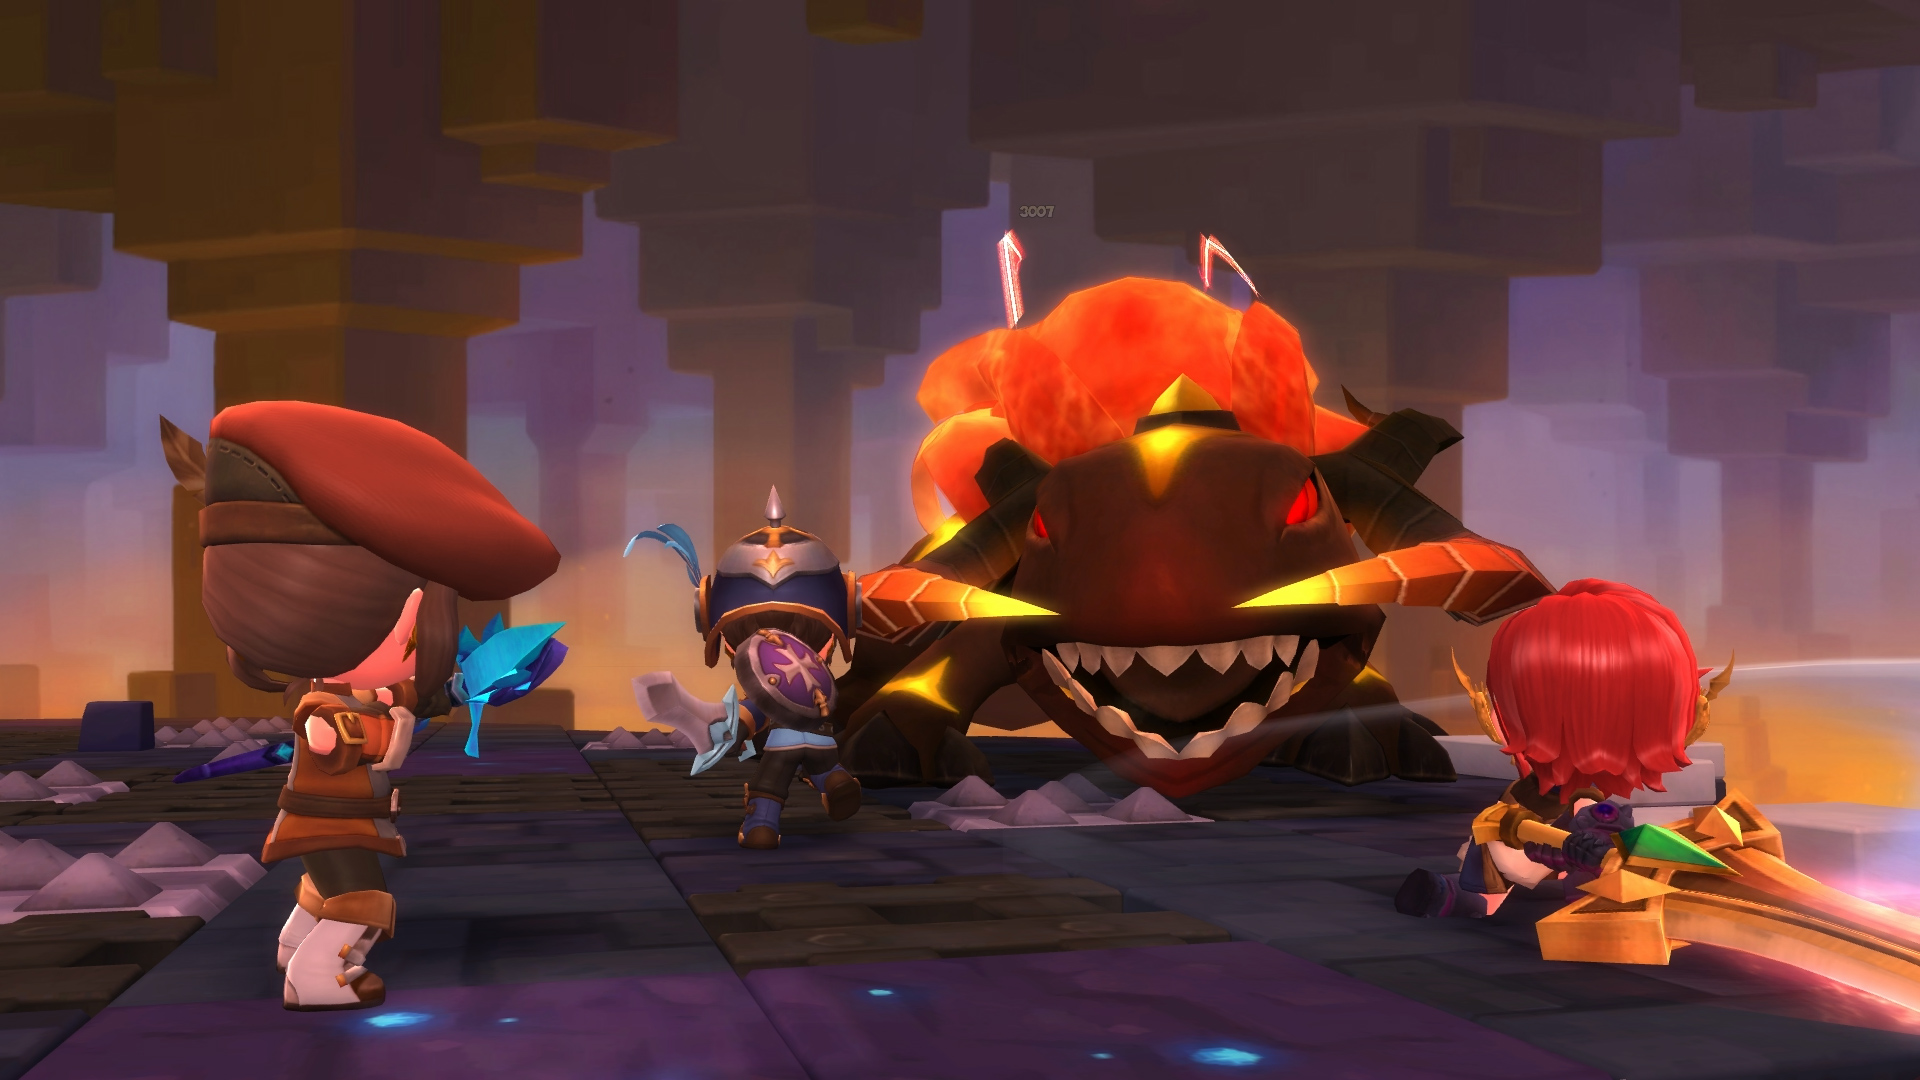 What’s new in MapleStory 2? | PCGamesN